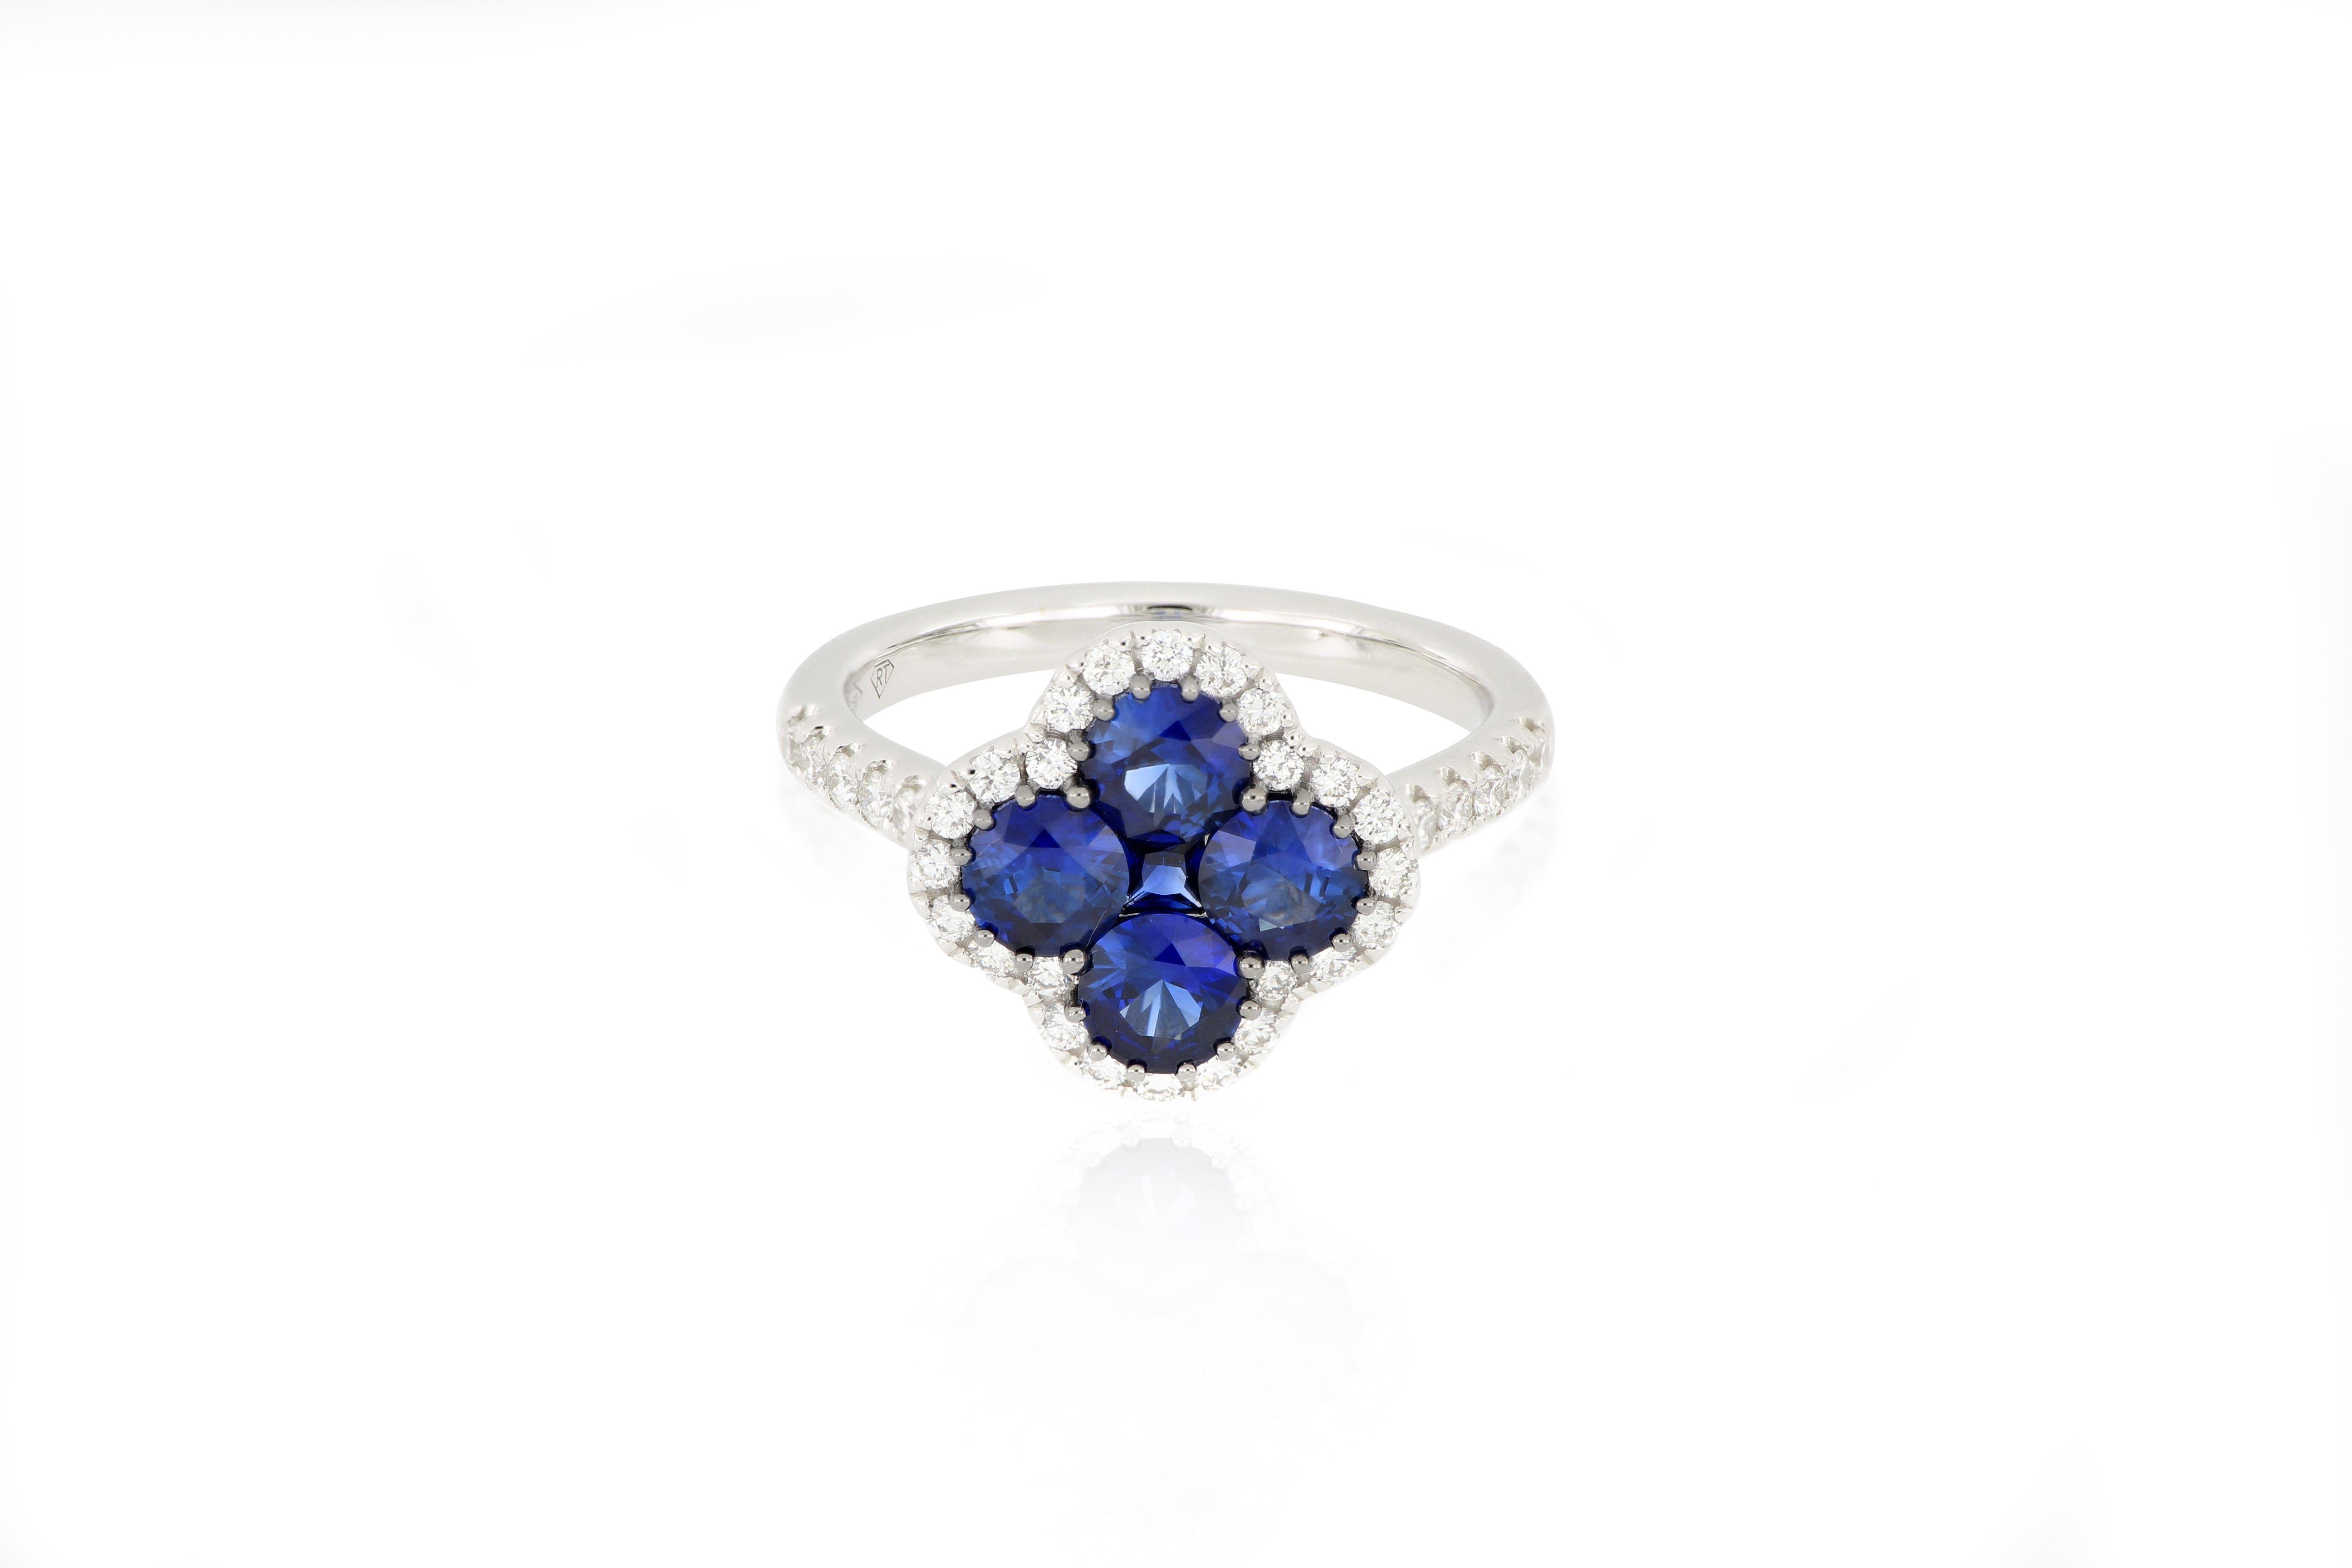 A beautiful sapphire and diamond ring. A cluster of natural sapphire arranged in a floral pattern weighing 1.55cts, surrounded by brilliant-cut diamonds extending to the shoulders, total weighing 0.42cts, mounted in 18 karat white gold.
O’Che 1867